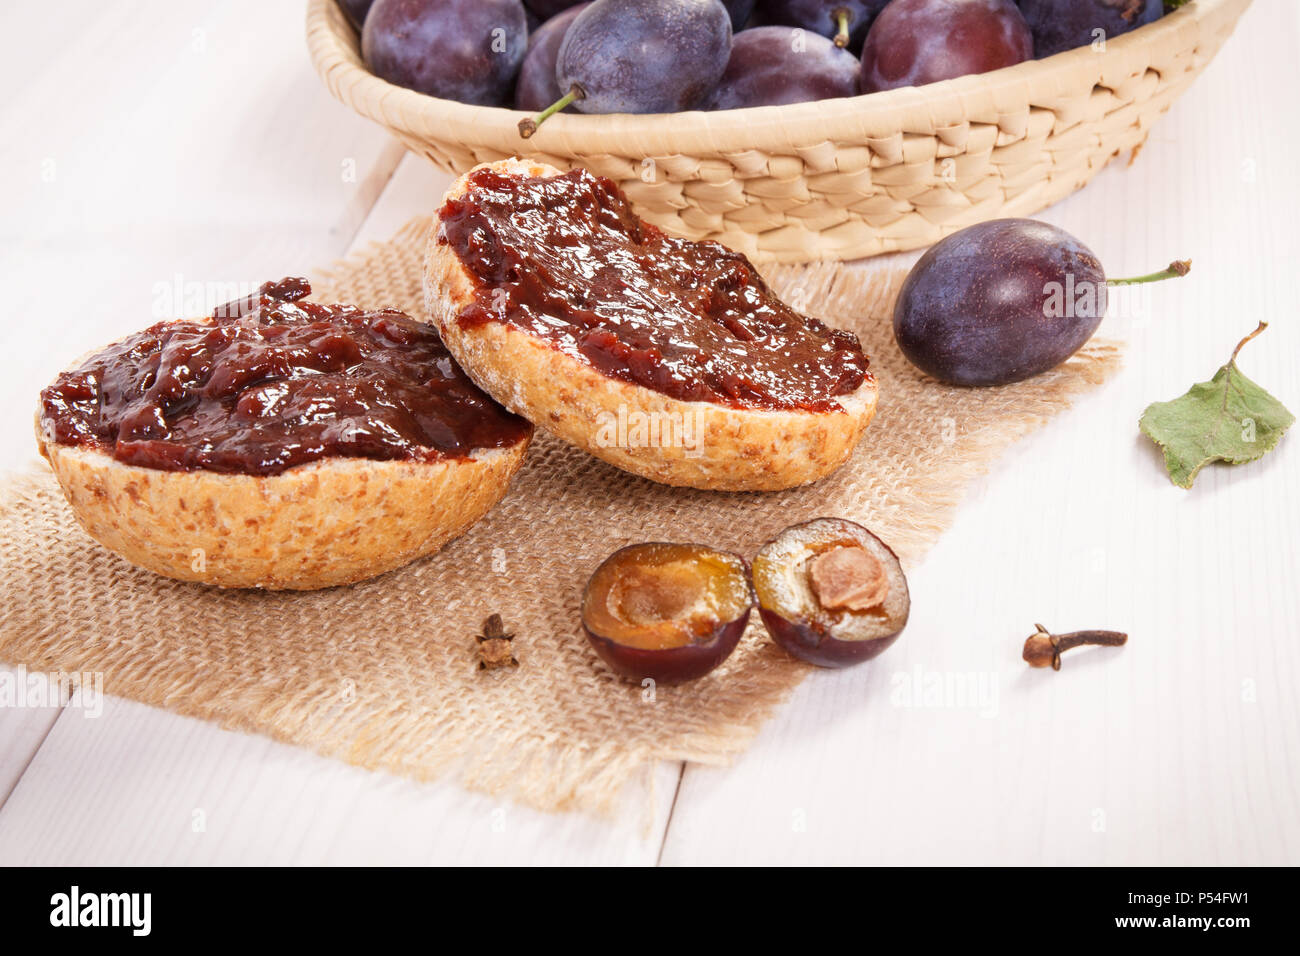 Sandwiches with plum marmalade or jam on jute burlap, concept of delicious breakfast Stock Photo